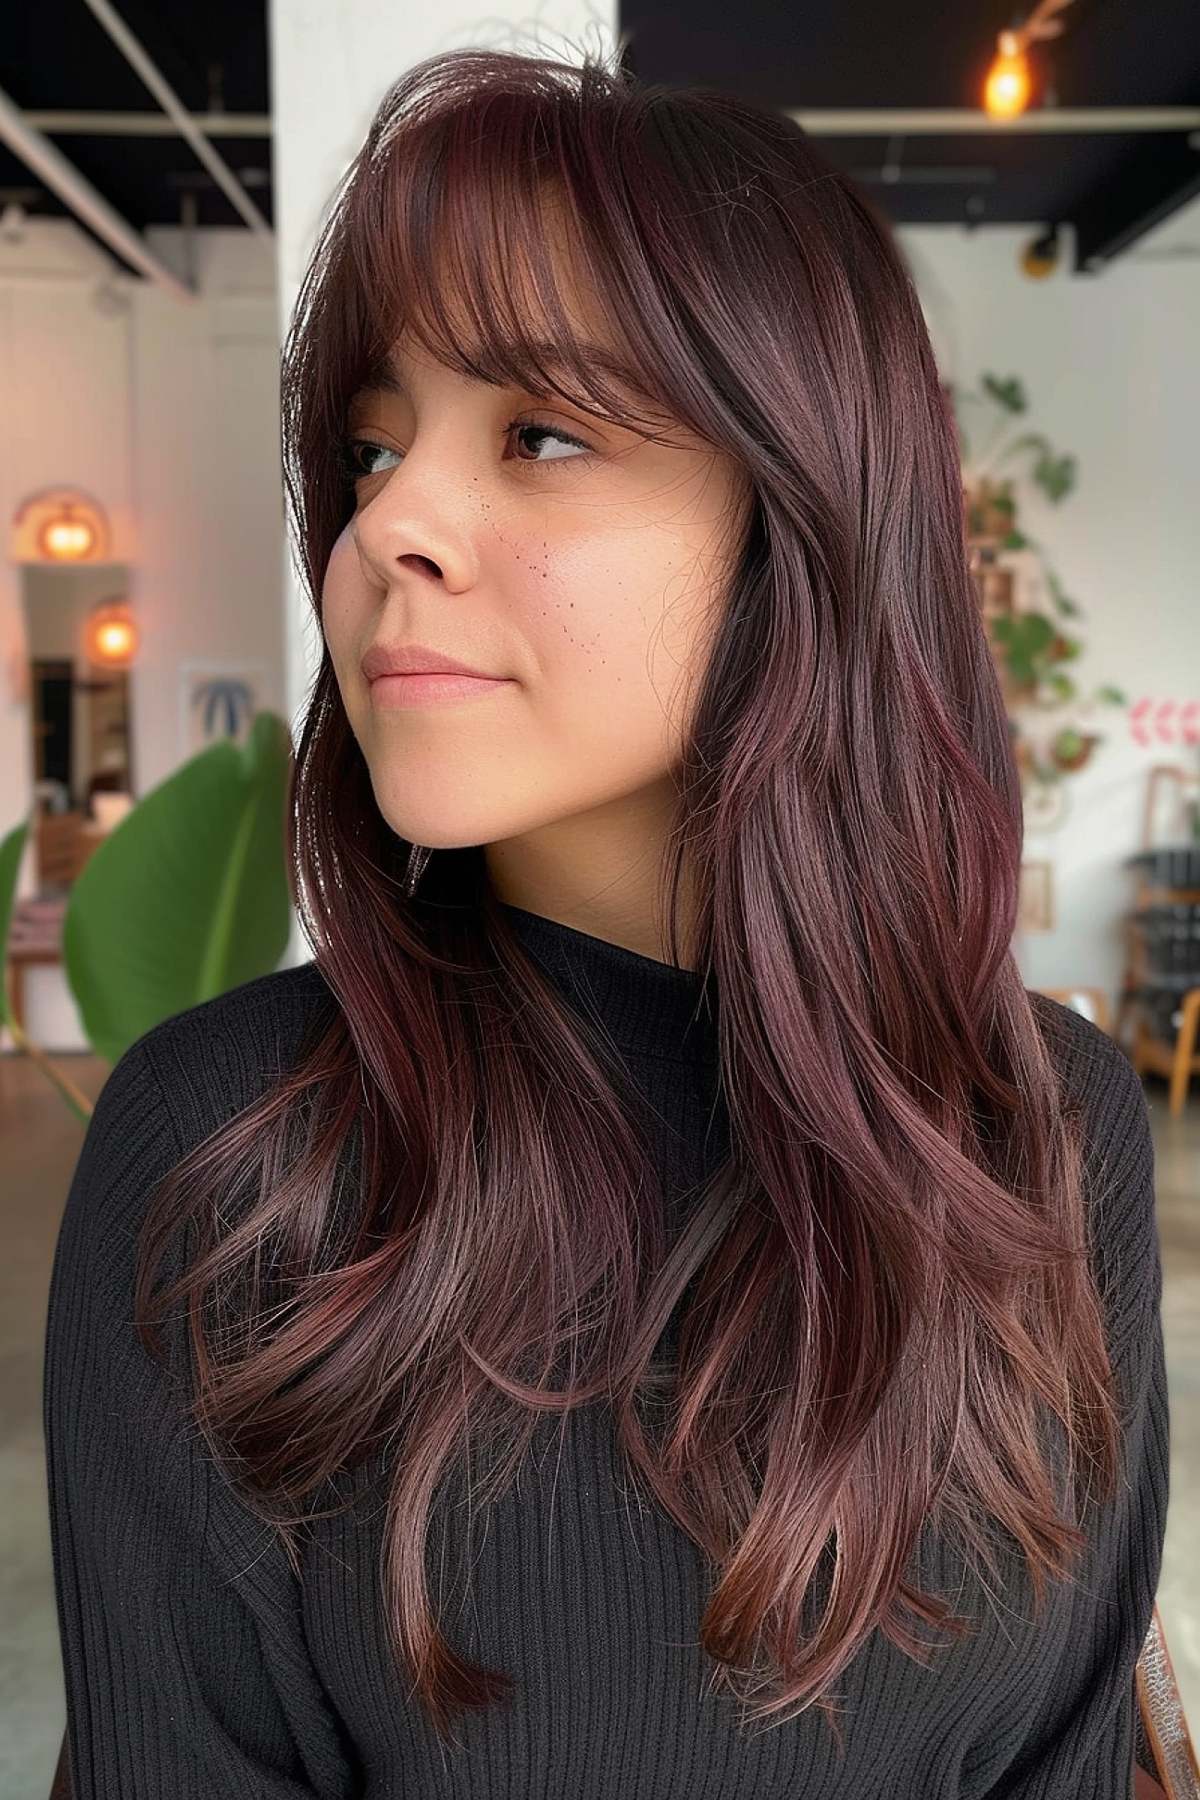 Long layered wolf haircut with burgundy color and side fringe